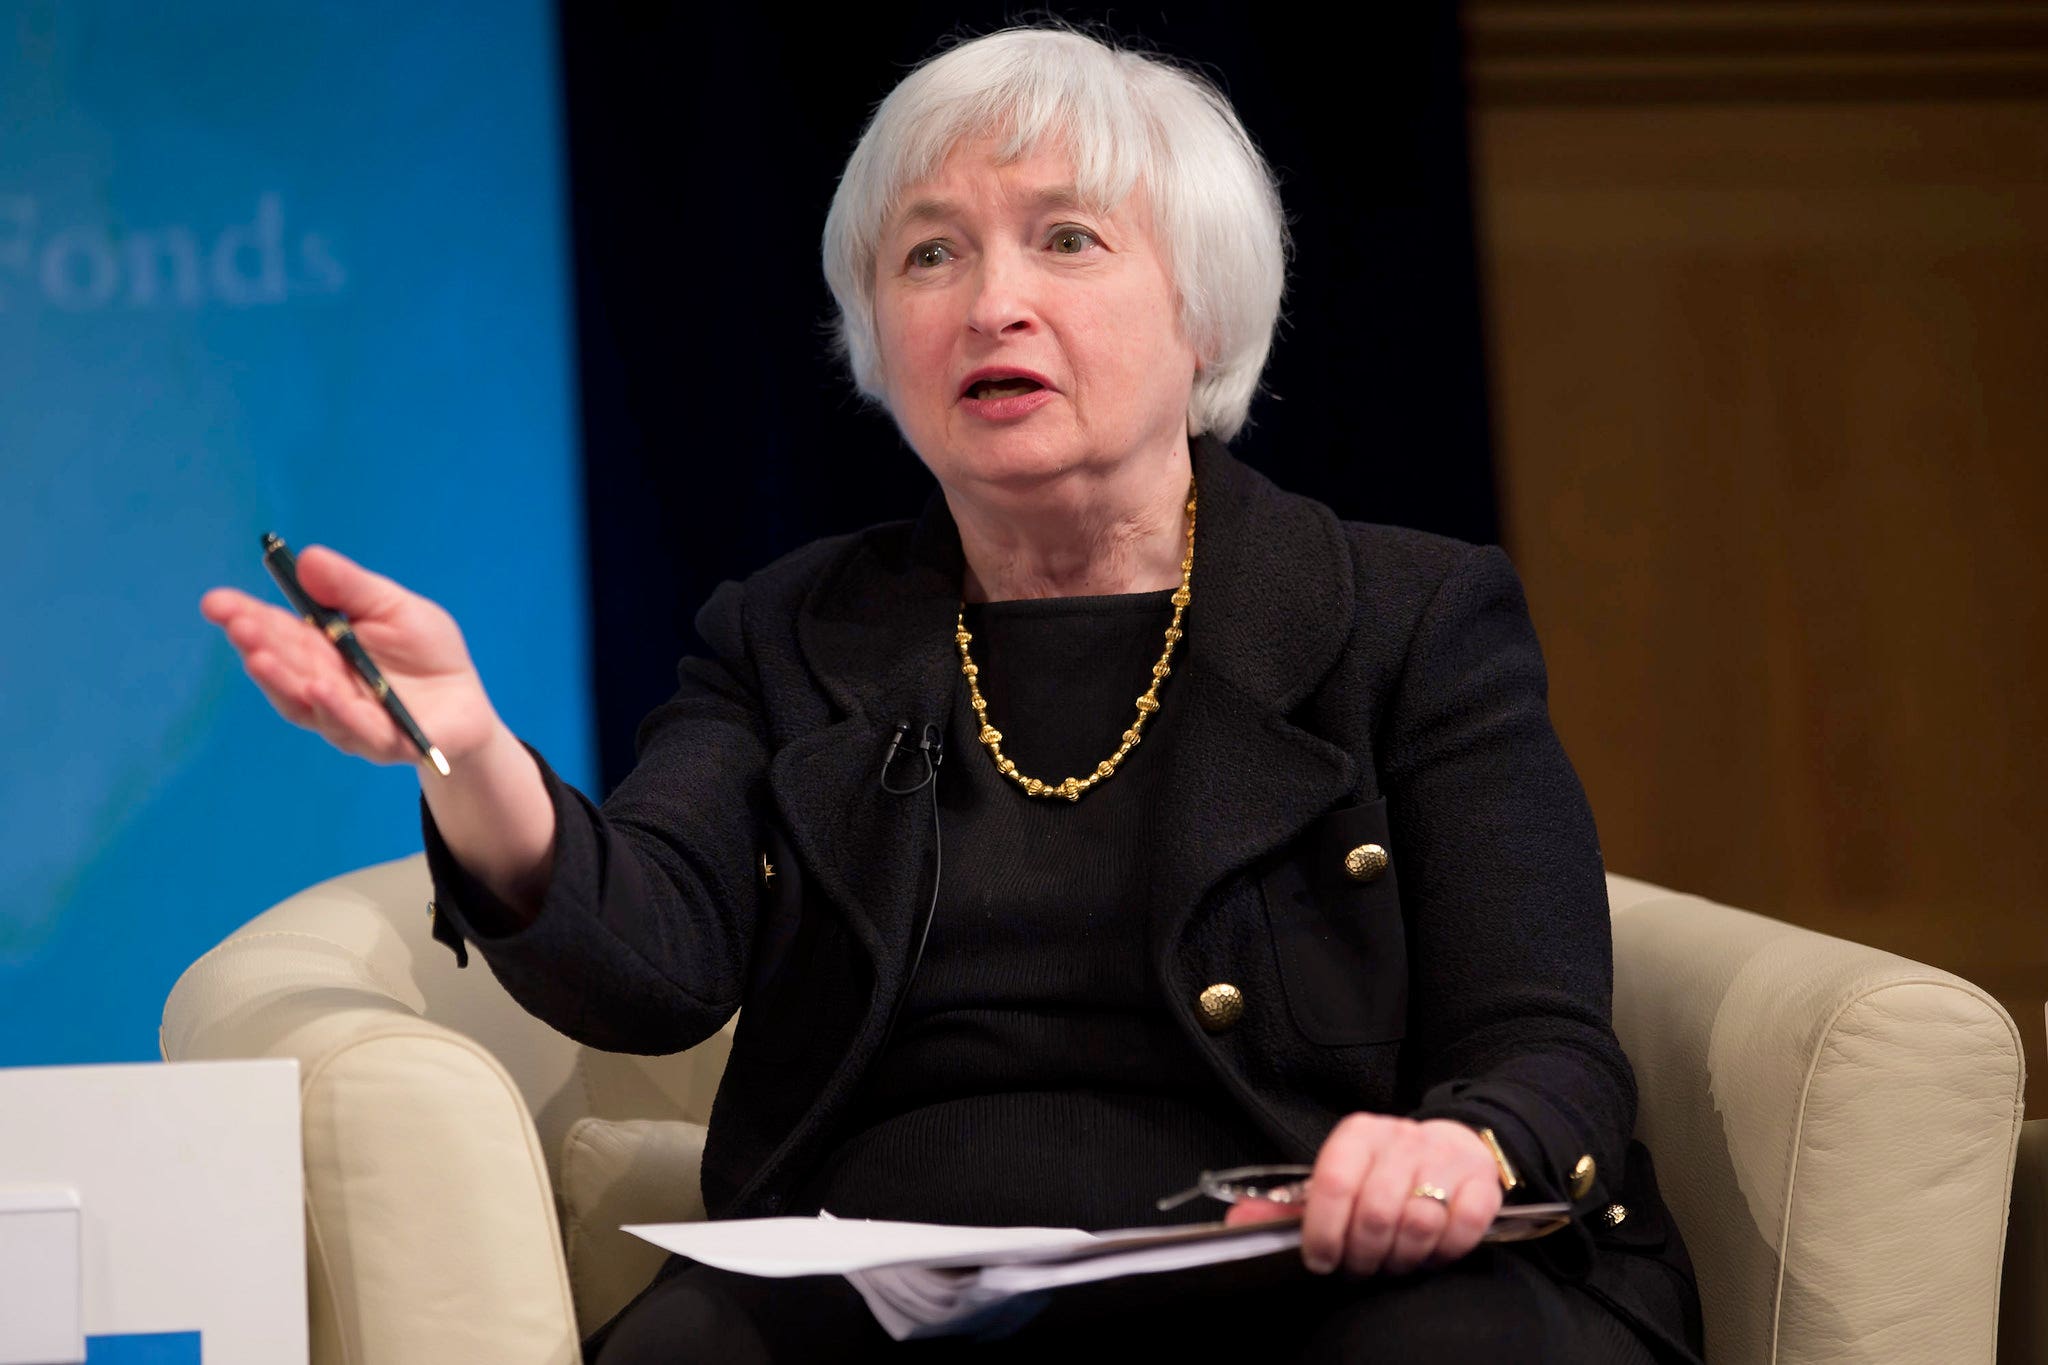 Yellen Activates Another 'Extraordinary' Measure To Avert Breaching Debt Limit: 'I Will Be Unable To Invest Fully...'